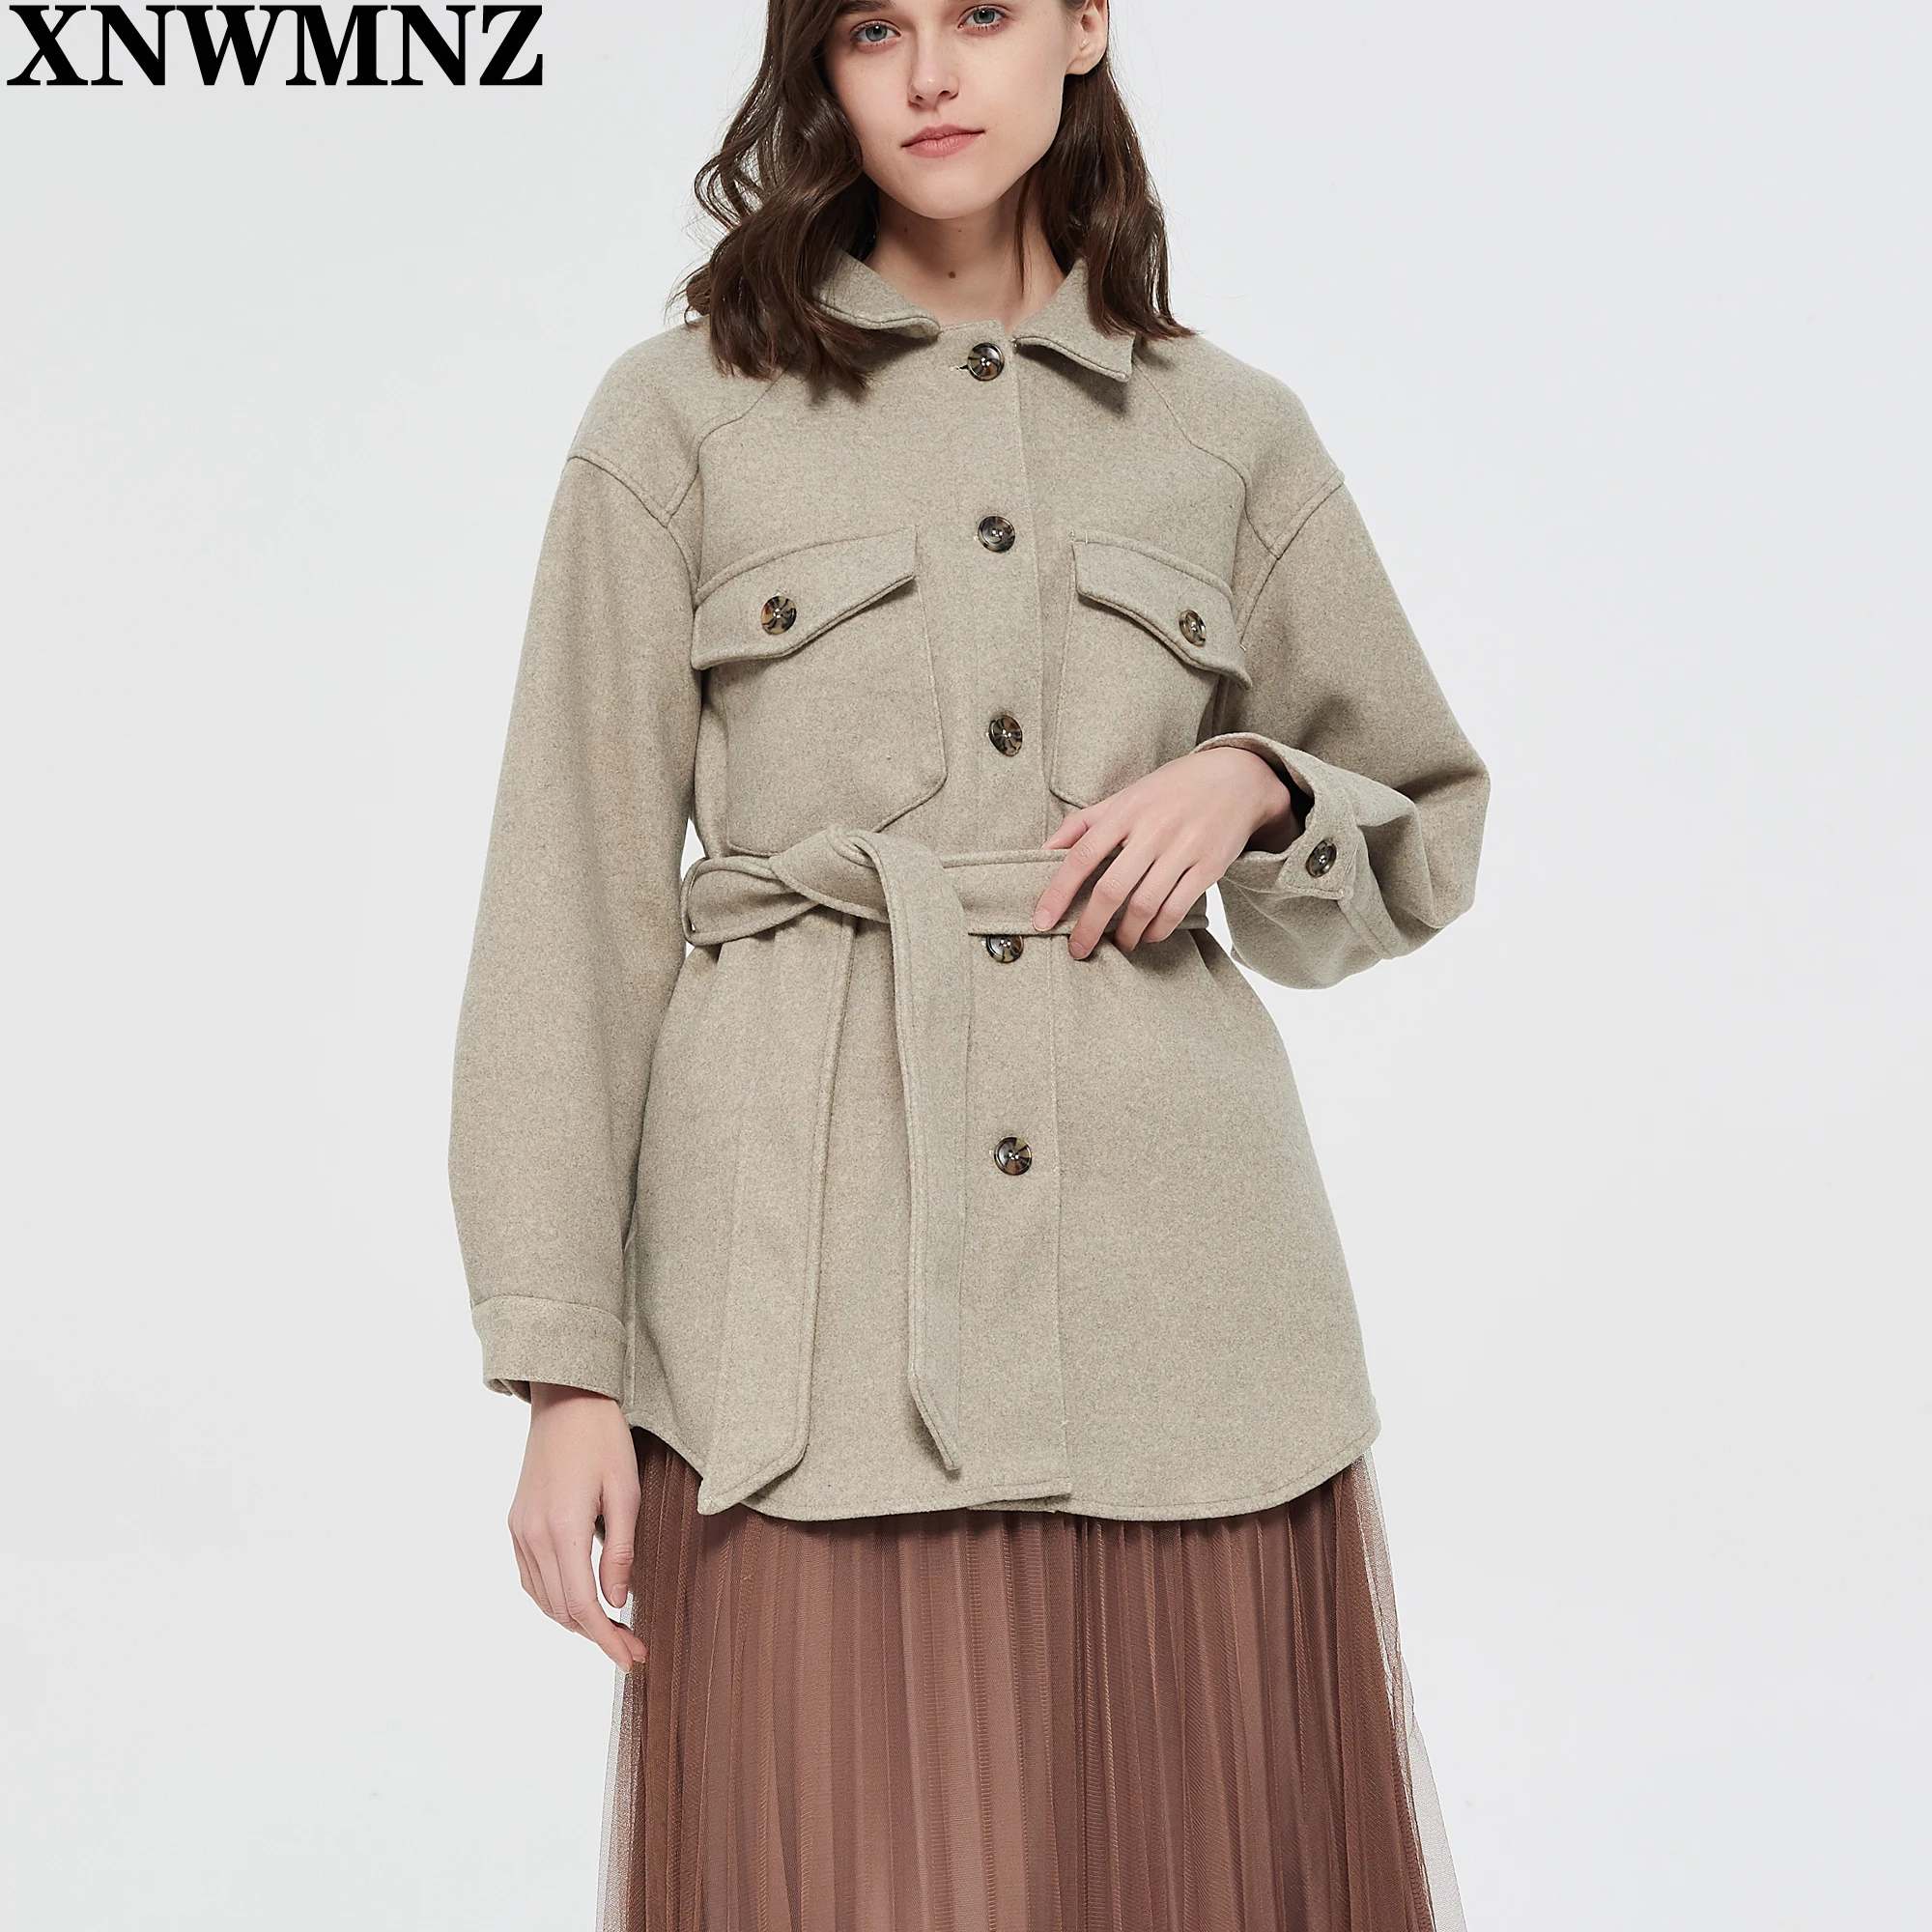 XNWMNZ Women 2021 Fashion With Belt Loose Woolen Jacket Coat Vintage Long Sleeve Side Pockets Female Outerwear Chic Overcoat houndstooth wide leg kintted jumpsuits romper women winter clothes chic zipper 3 4 sleeve pockets jumpsuits overalls plaid 2021